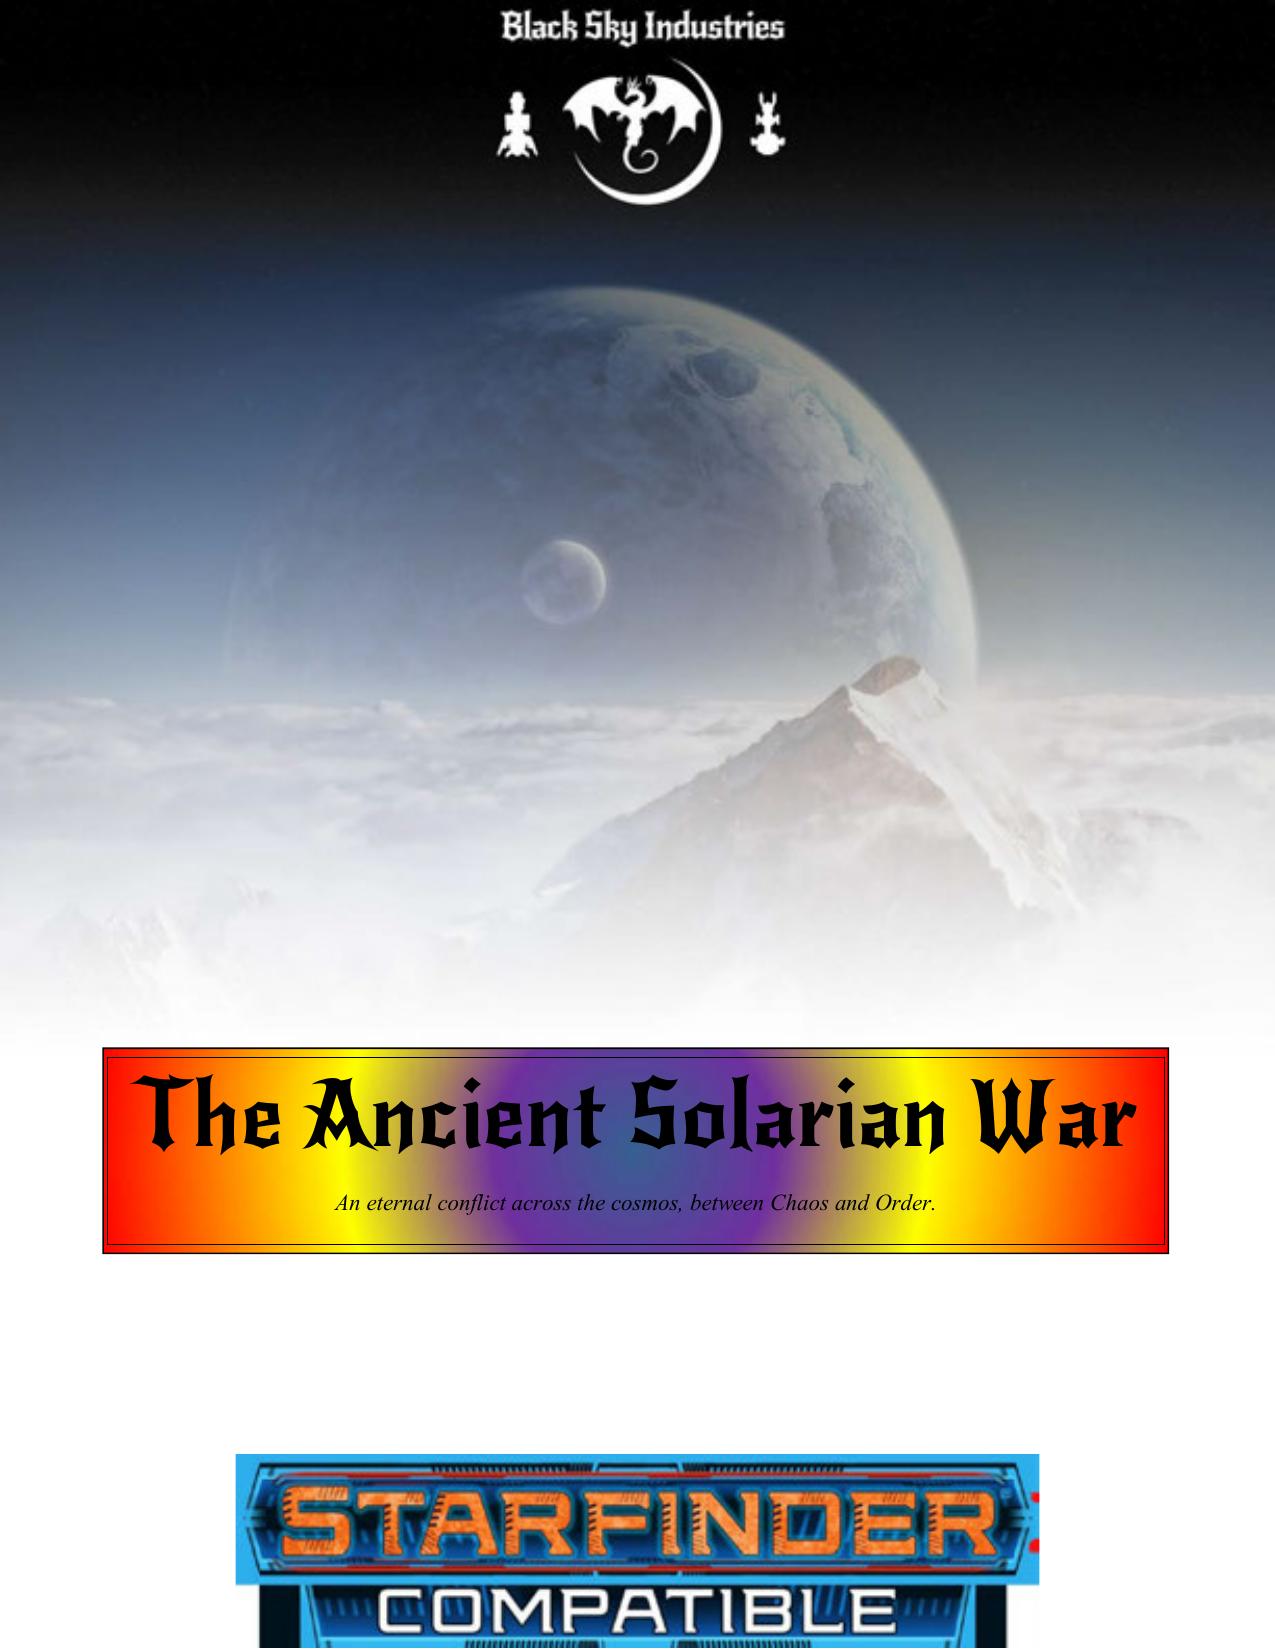 The Ancient Solarian War